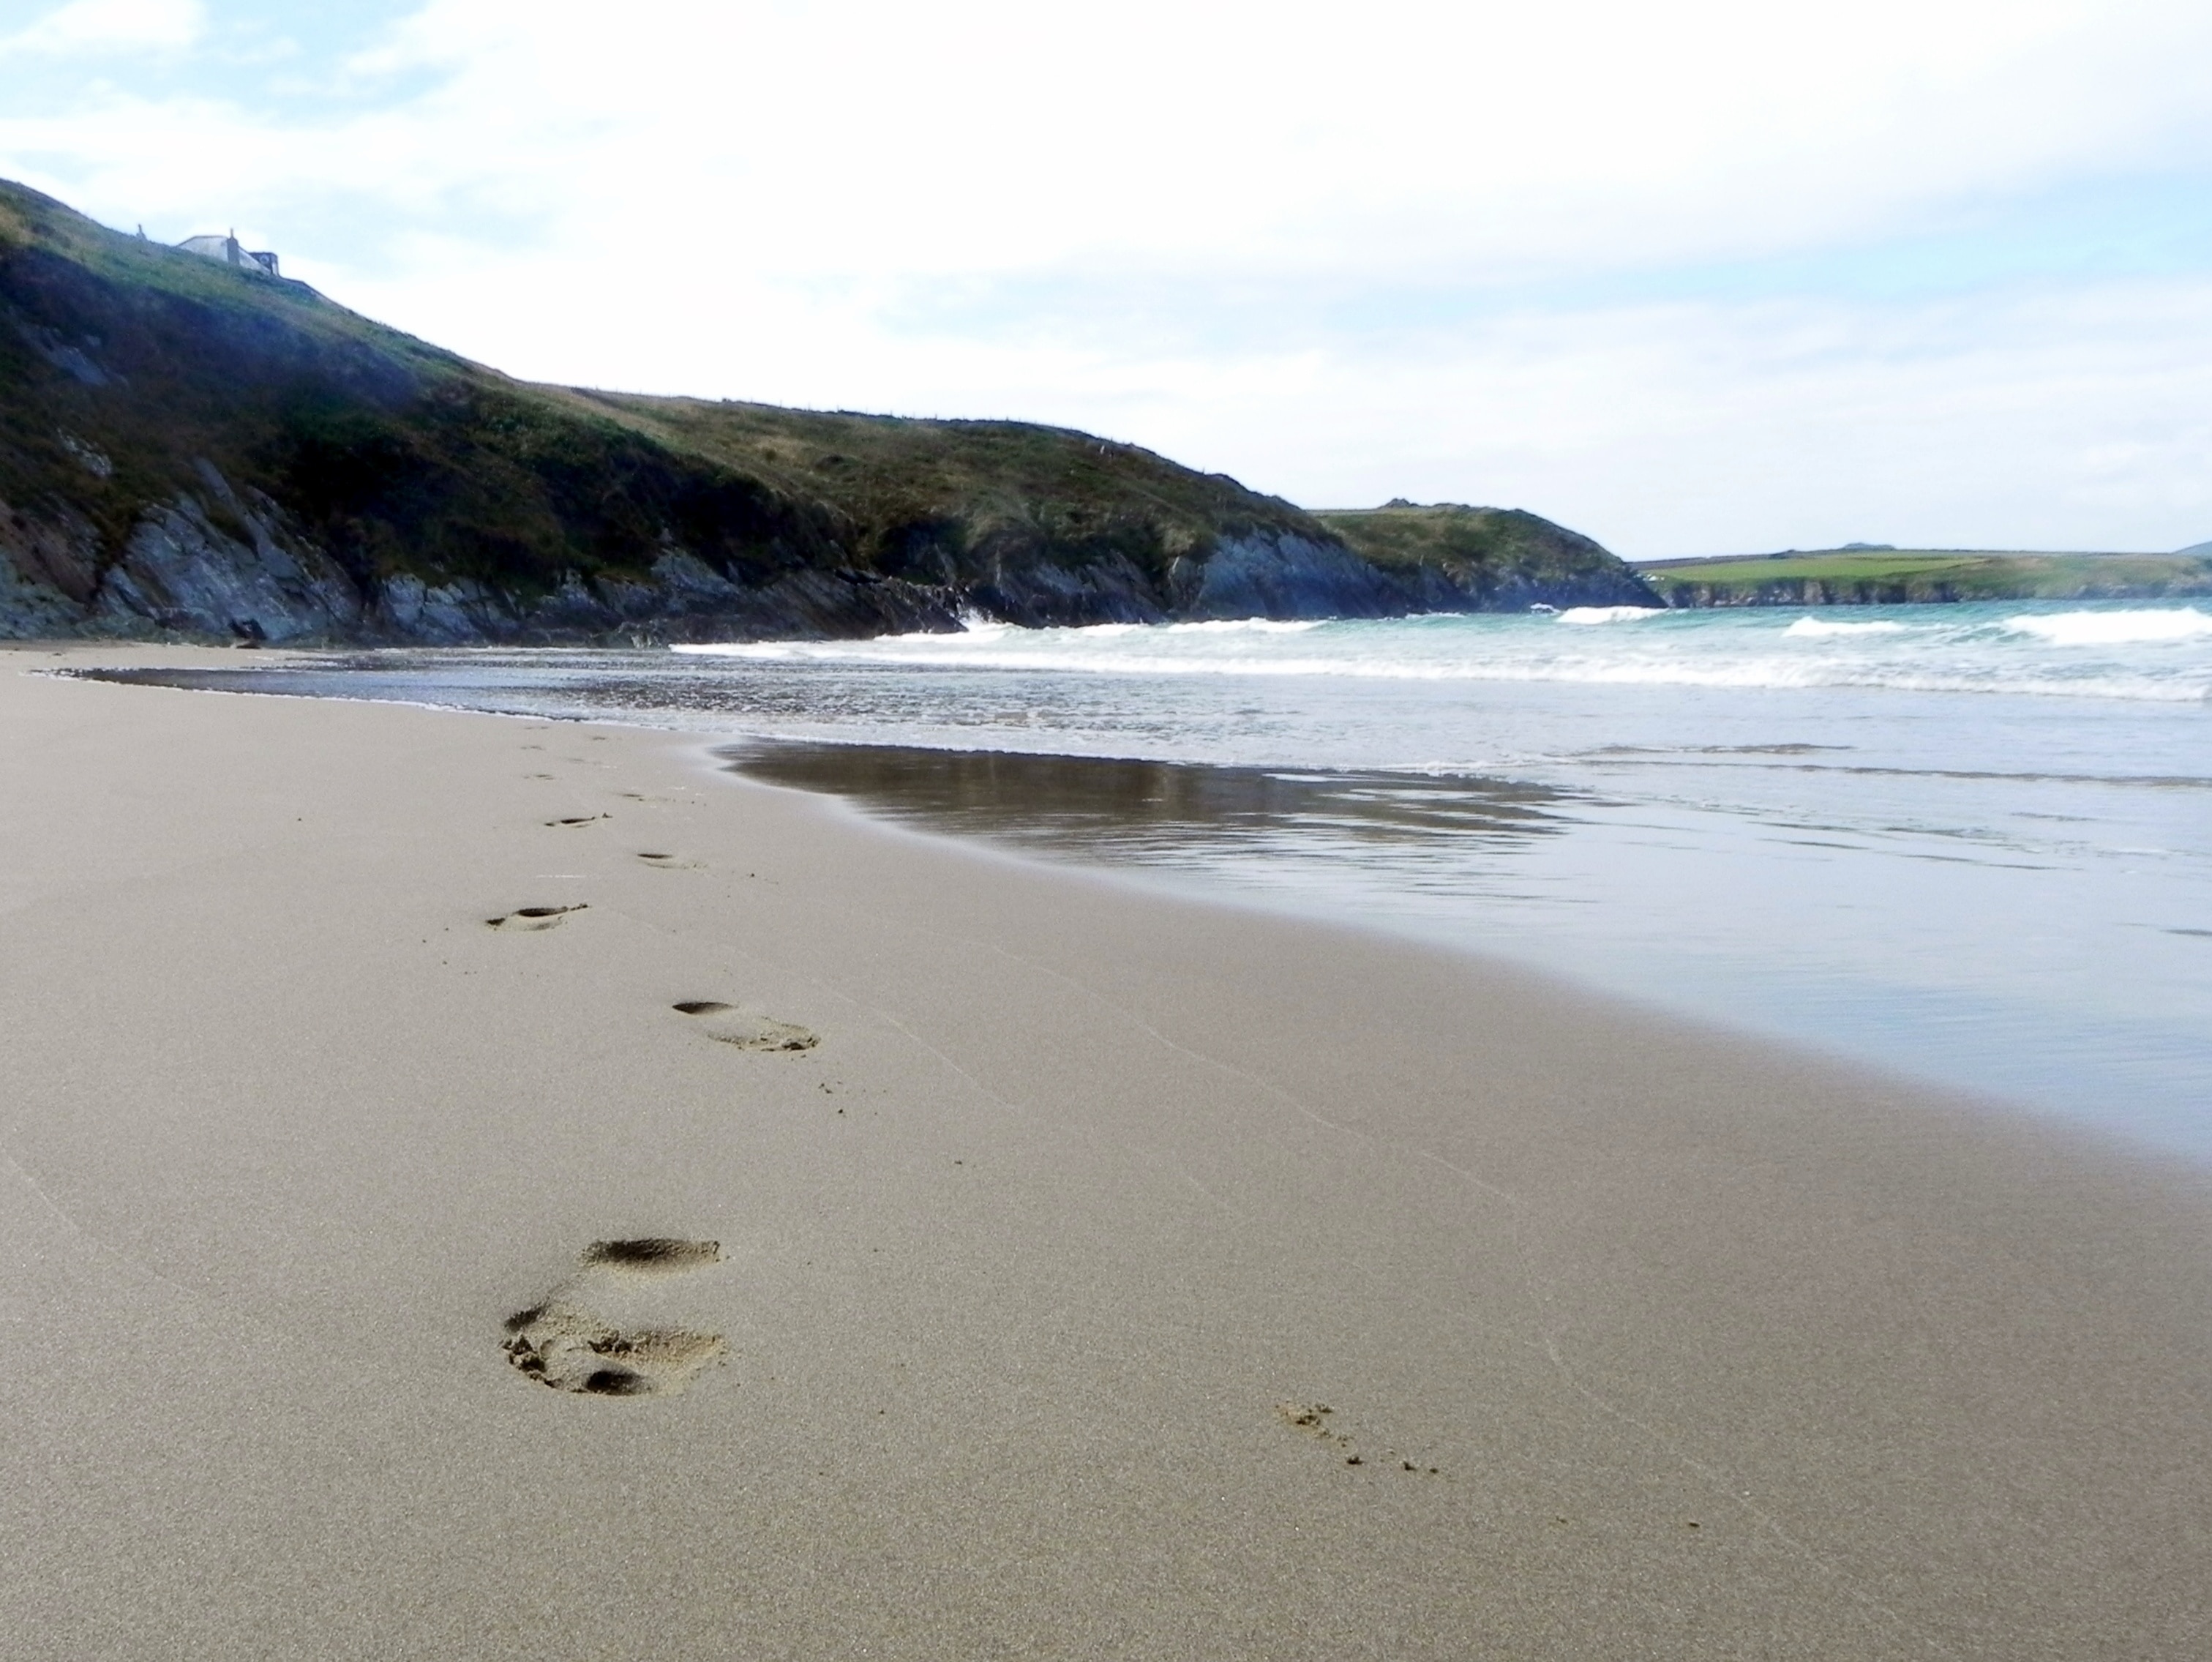 Footsteps

An early morning stroll and the first ones on the beach. A beautiful place to enjoy some time with a bucket and spade!

Alternatively, why not try one of the dolphin & seal watching boat trips that leave from close by.  

#Lifeatexpedia #Beach  